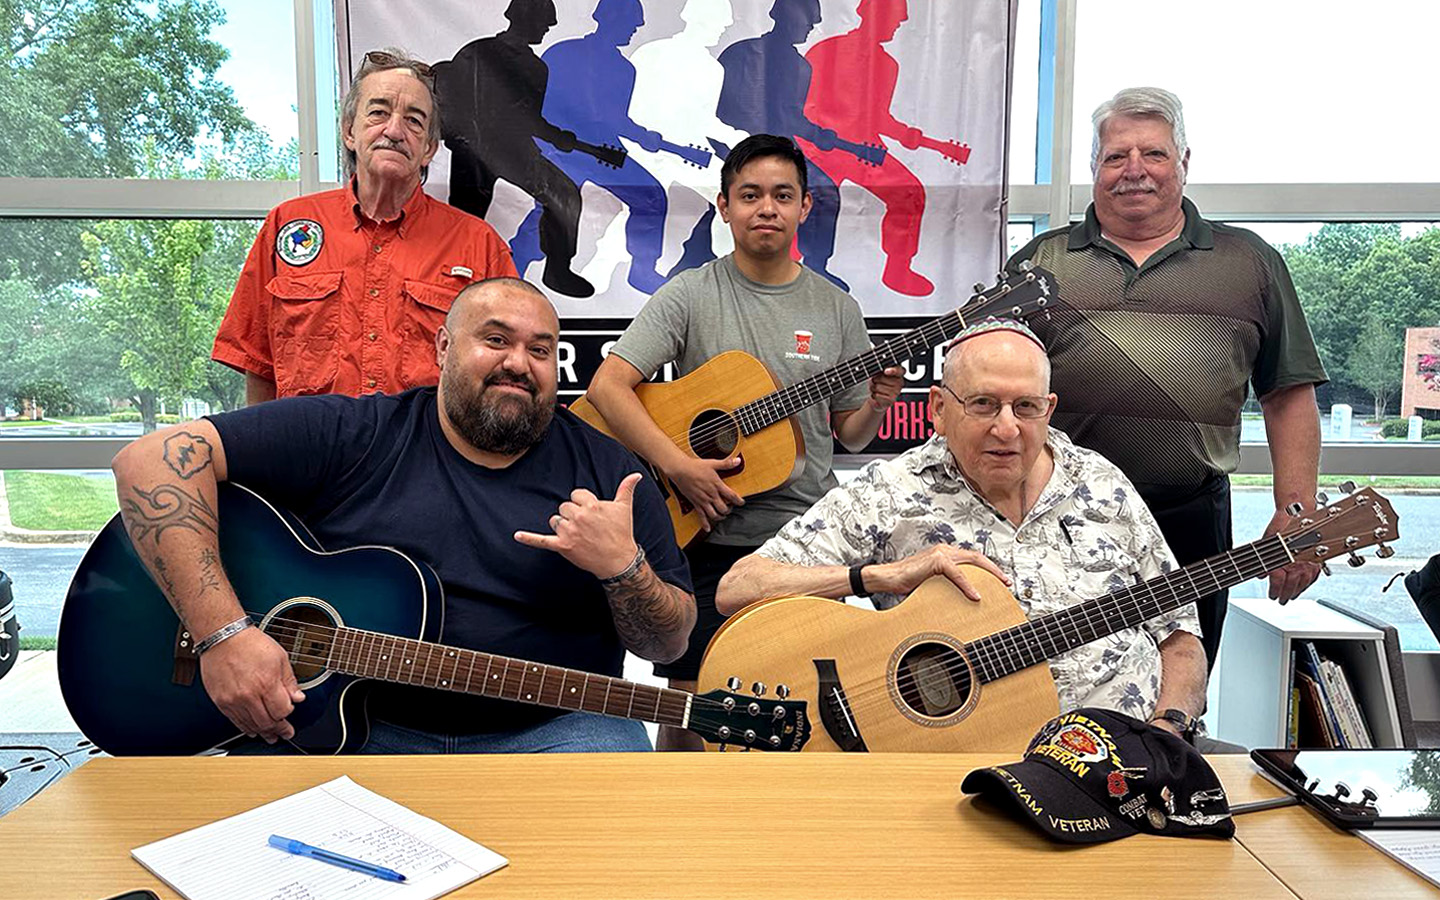 A group of United States war veterans—including Phil Schwartz and John Gerac—poses for a photo after participating in a Soldier Songs and Voices event.